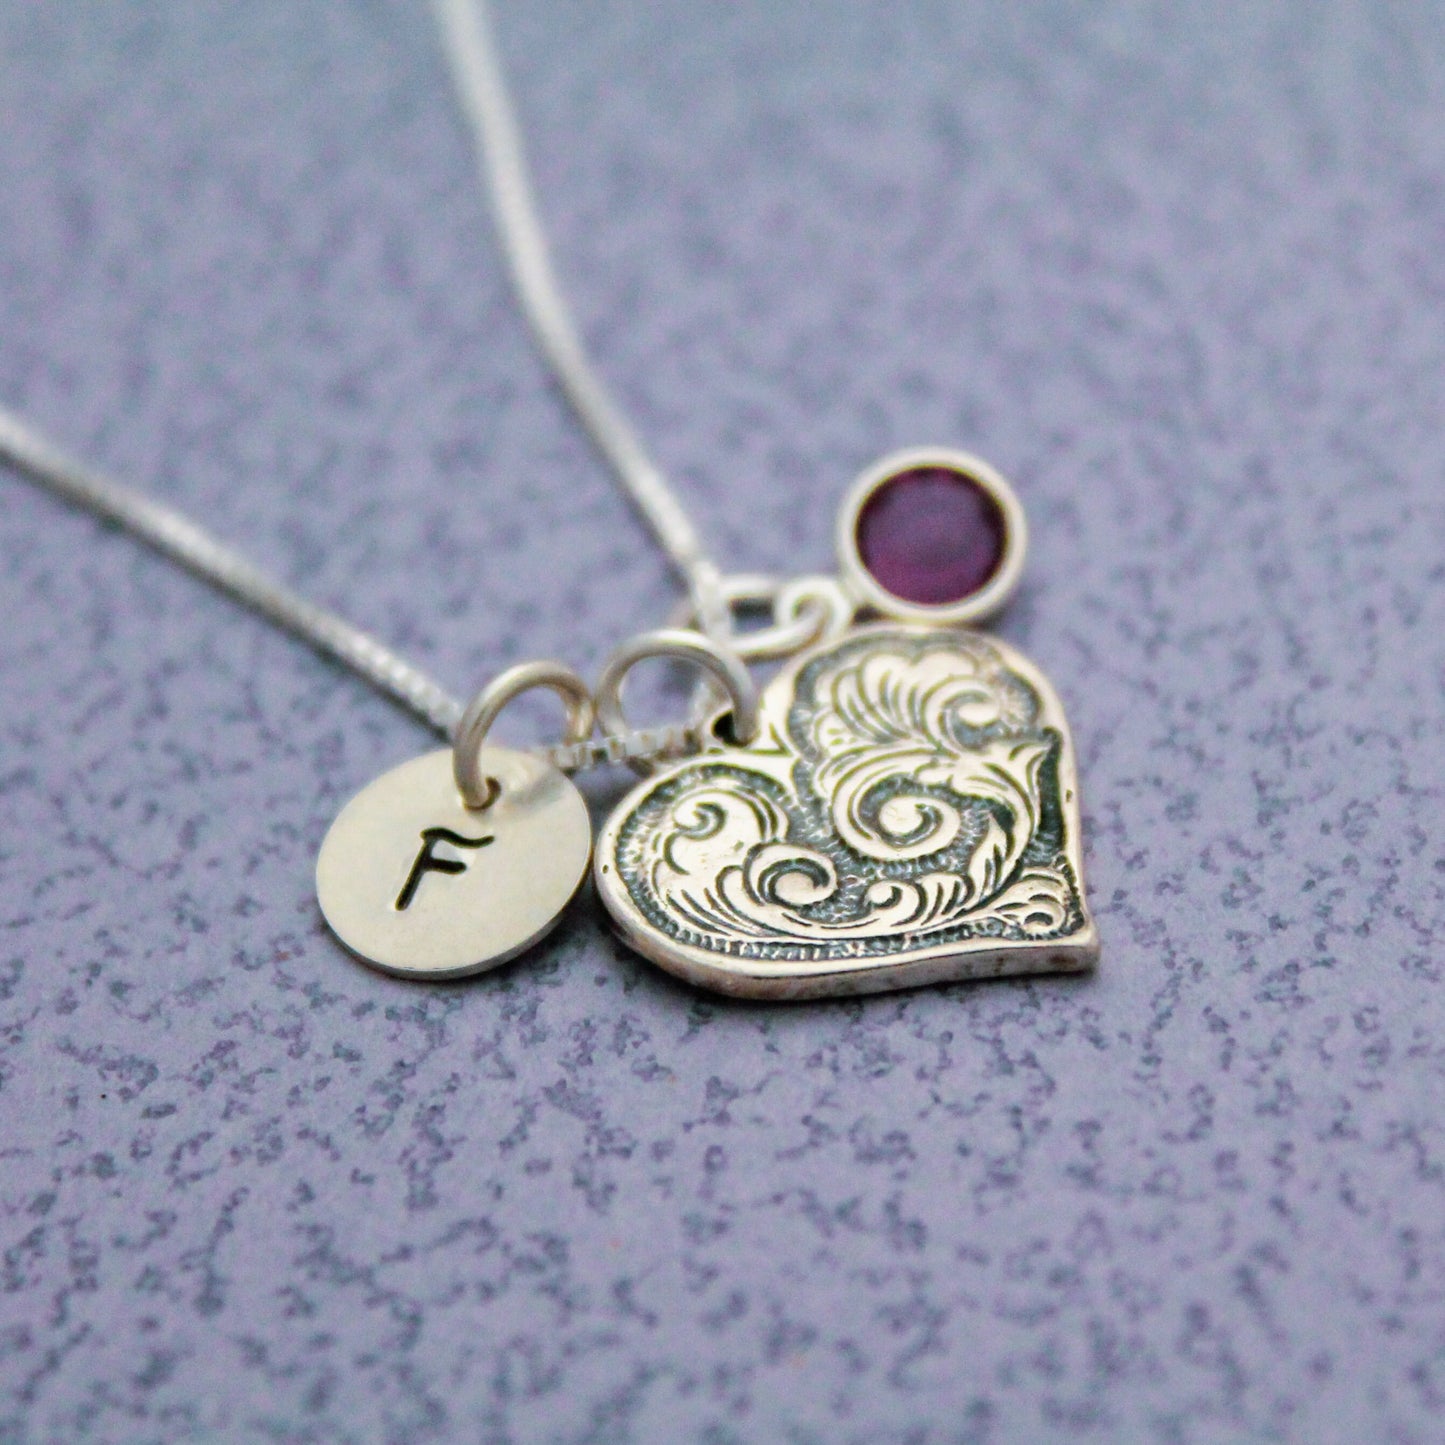 Initial and Decorative Heart Necklace in Sterling Silver Hand Stamped Personalized Jewelry, Birthstone Jewelry for Her, Cute Heart Necklace